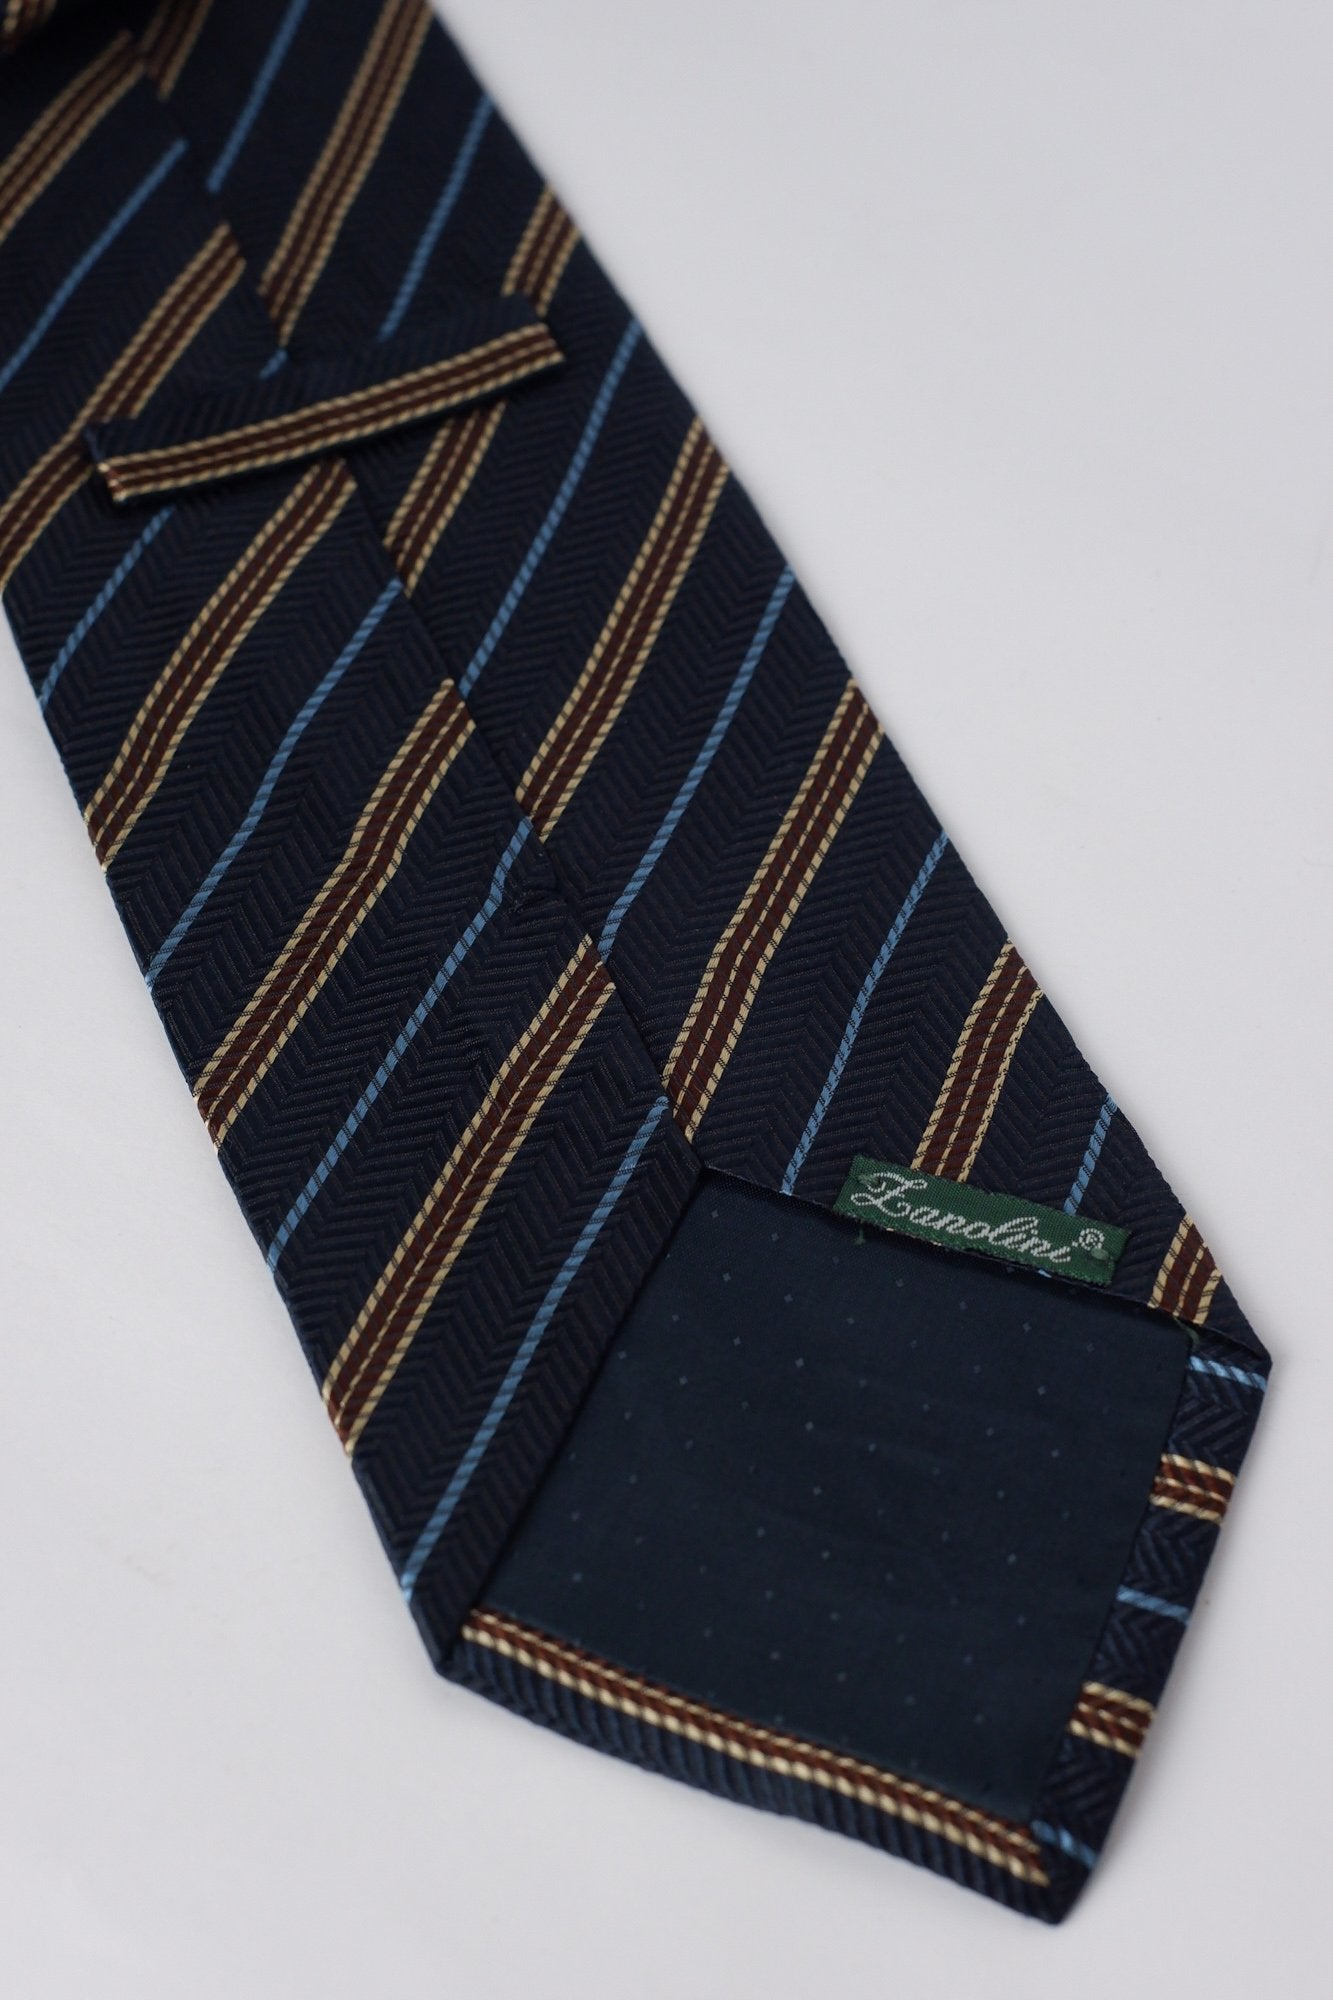 Lanolini Navy with Brown and Blue Stripes Necktie